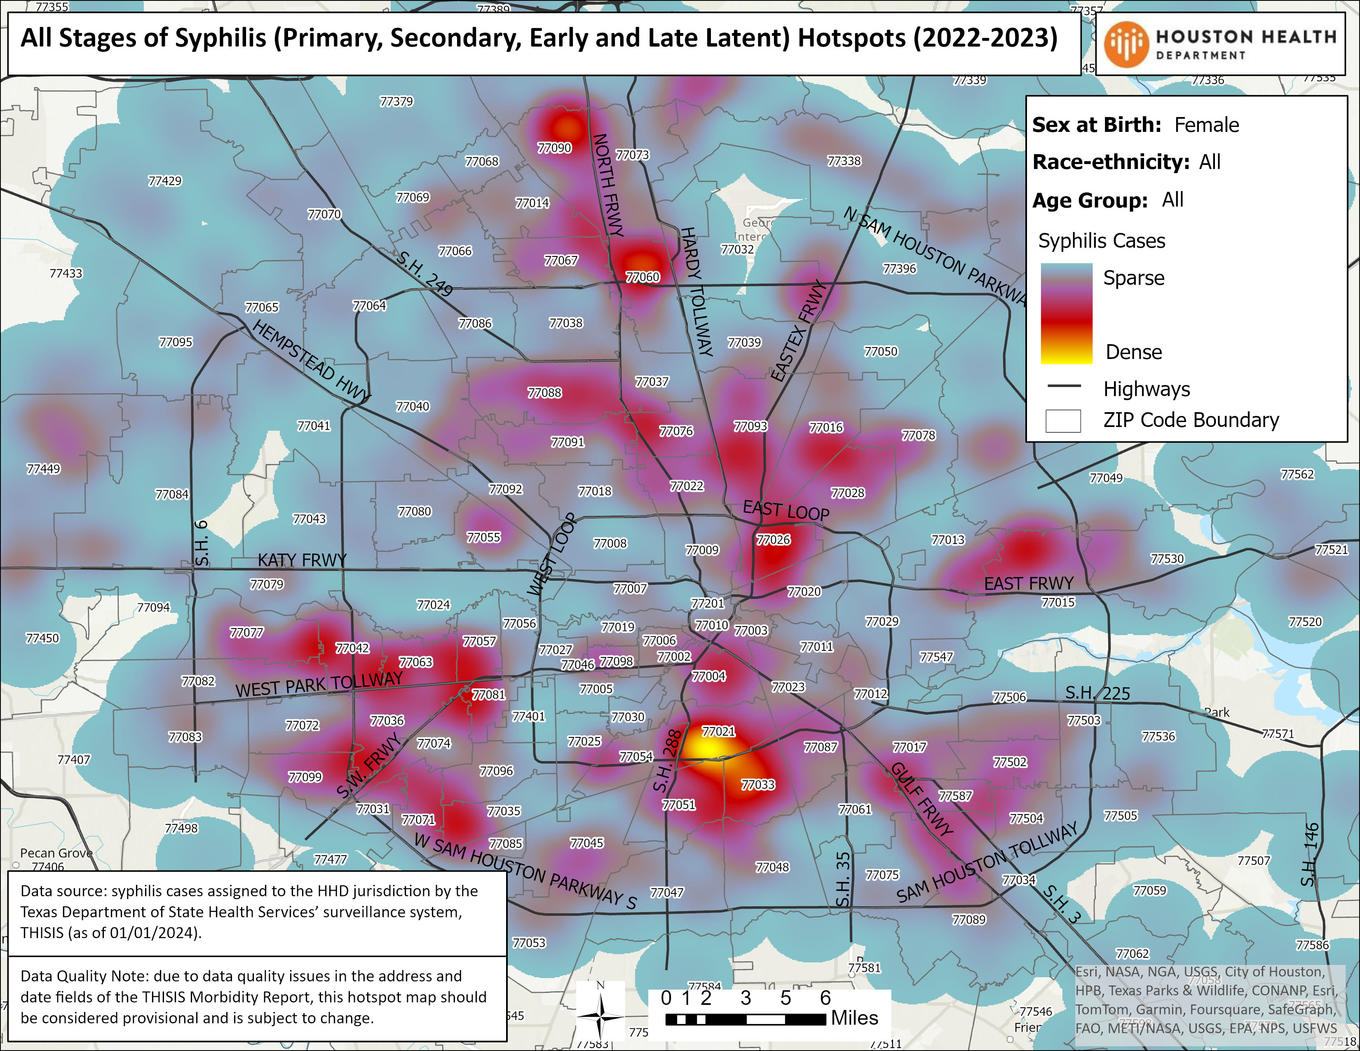 All Stage of Syphilis(Primary, Secondary, Early and Late Latent) Hotspots (2022-2023). Sex at birth: Female